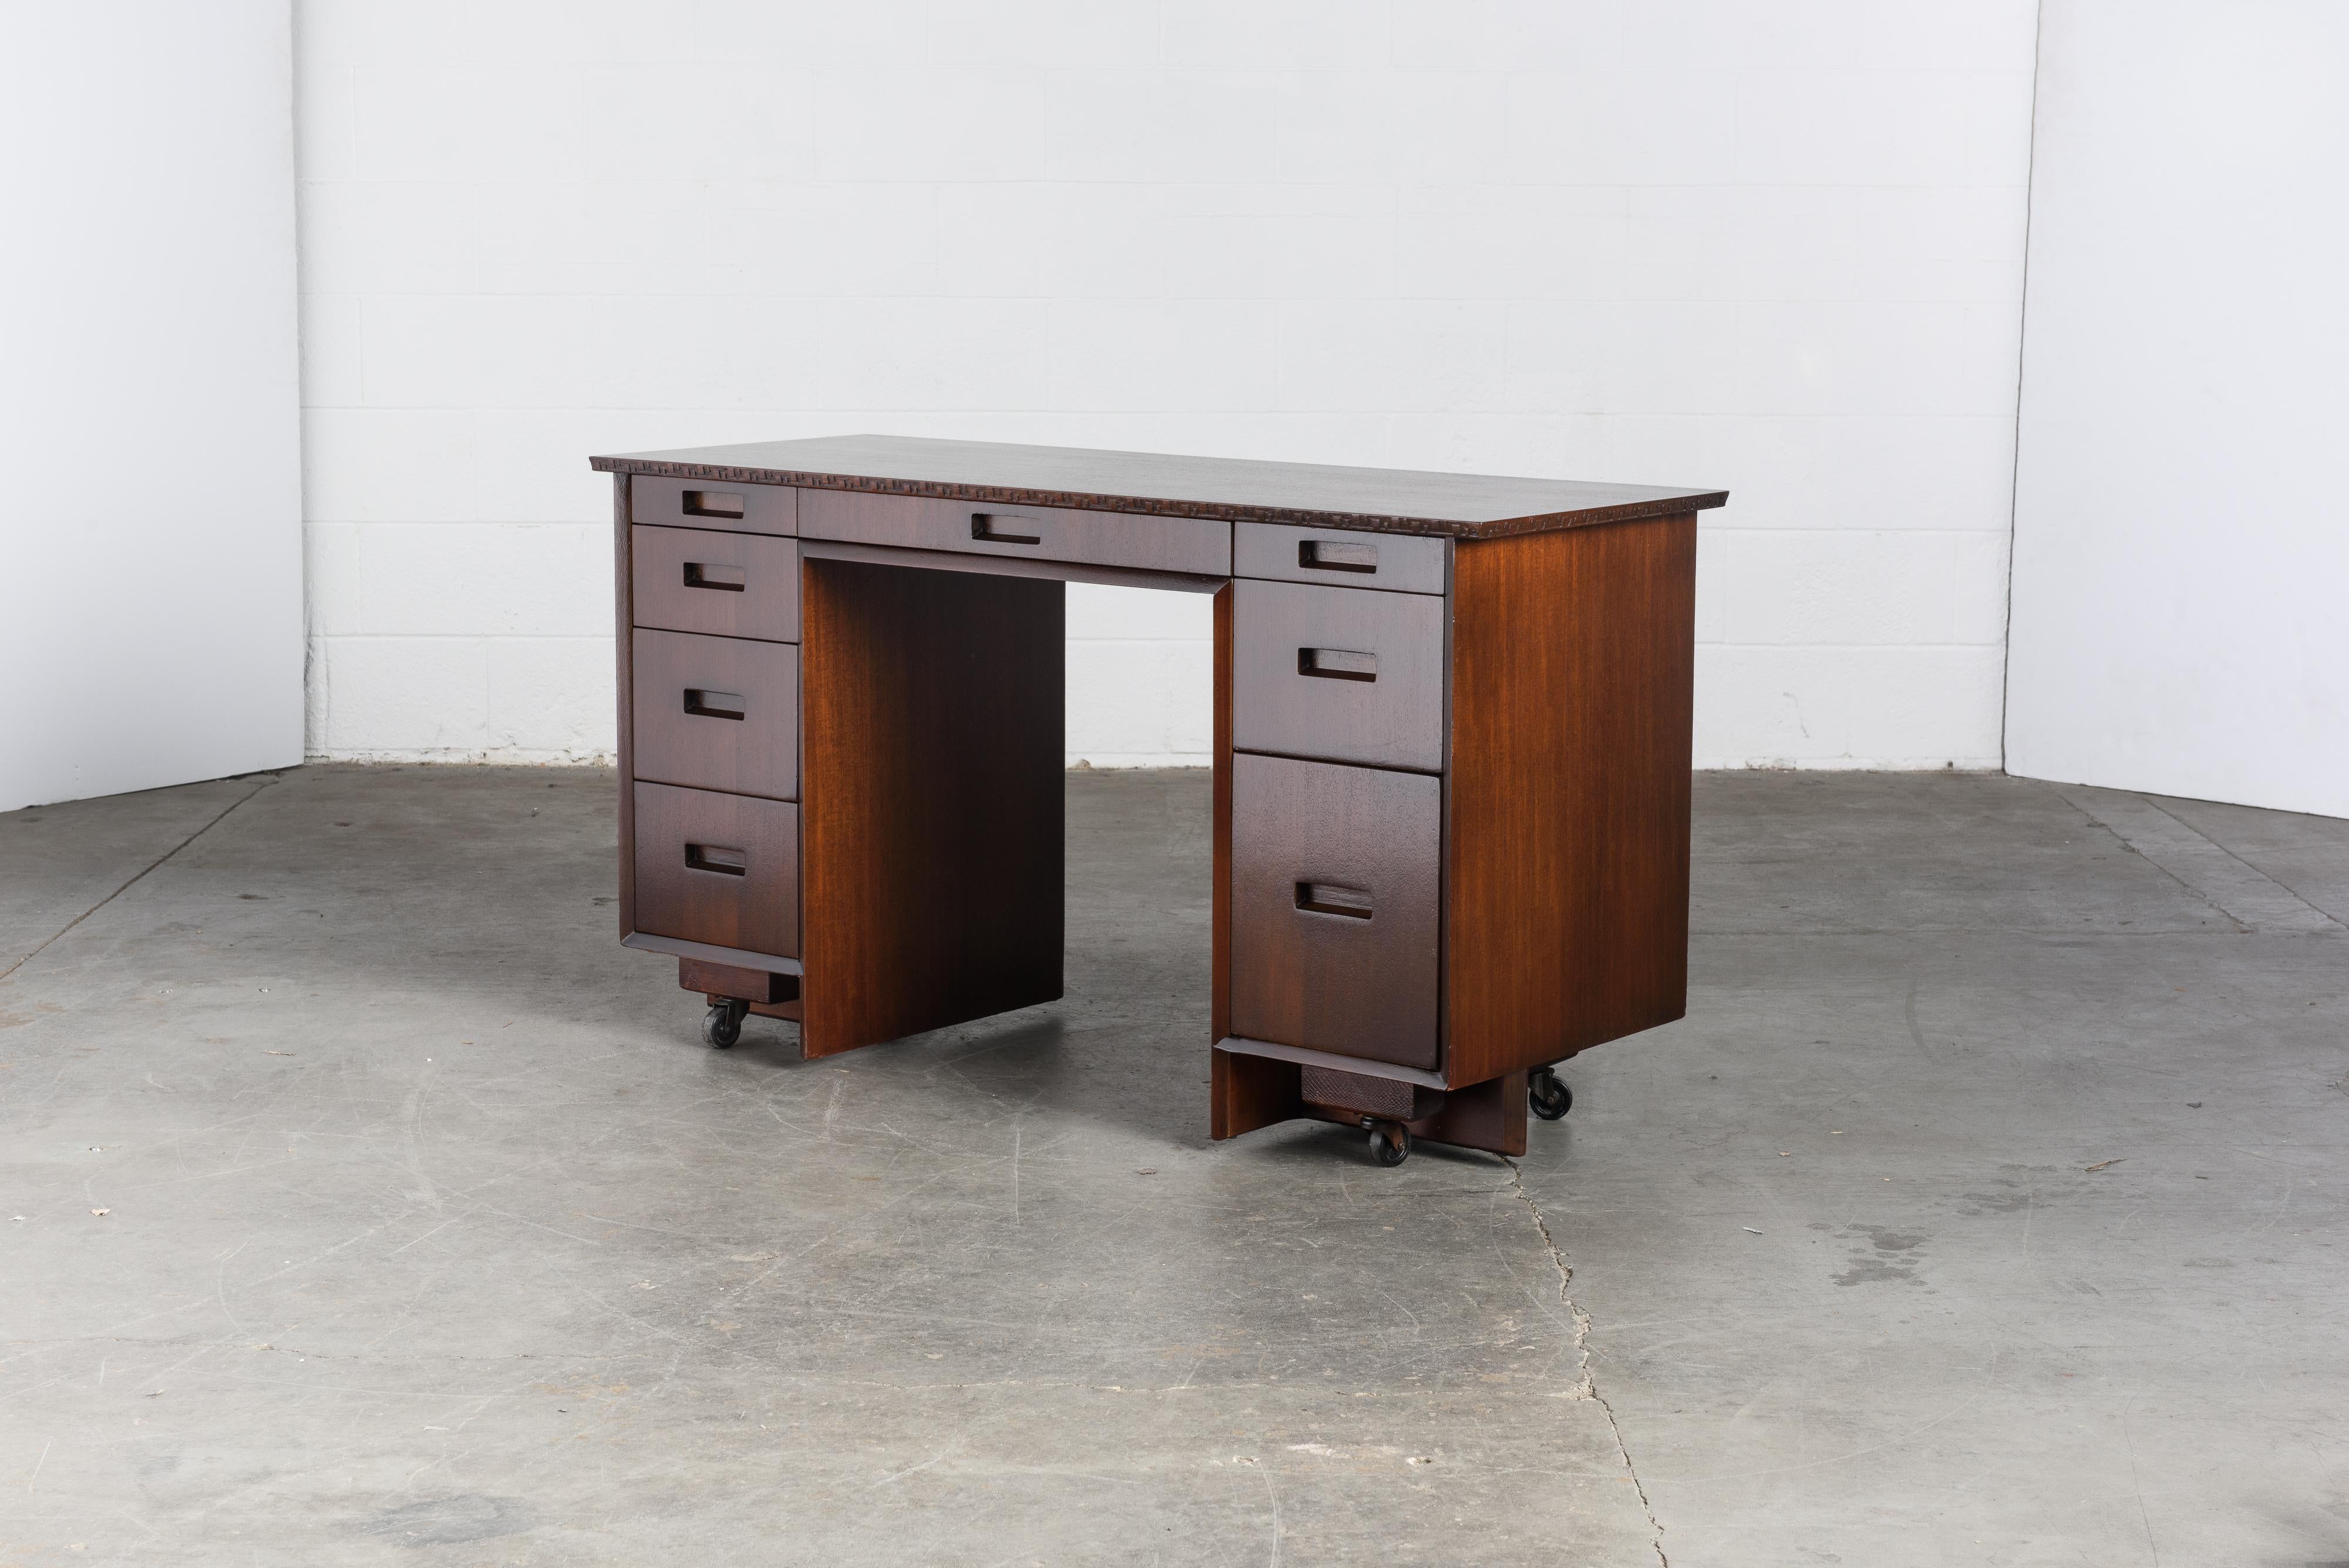 This gorgeously refinished Honduran Mahogany 'Taliesin' desk was designed by Frank Lloyd Wright for Heritage-Henredon in 1955 and produced only for two years, therefore is now a highly sought-after and rare collectors item. This example is signed